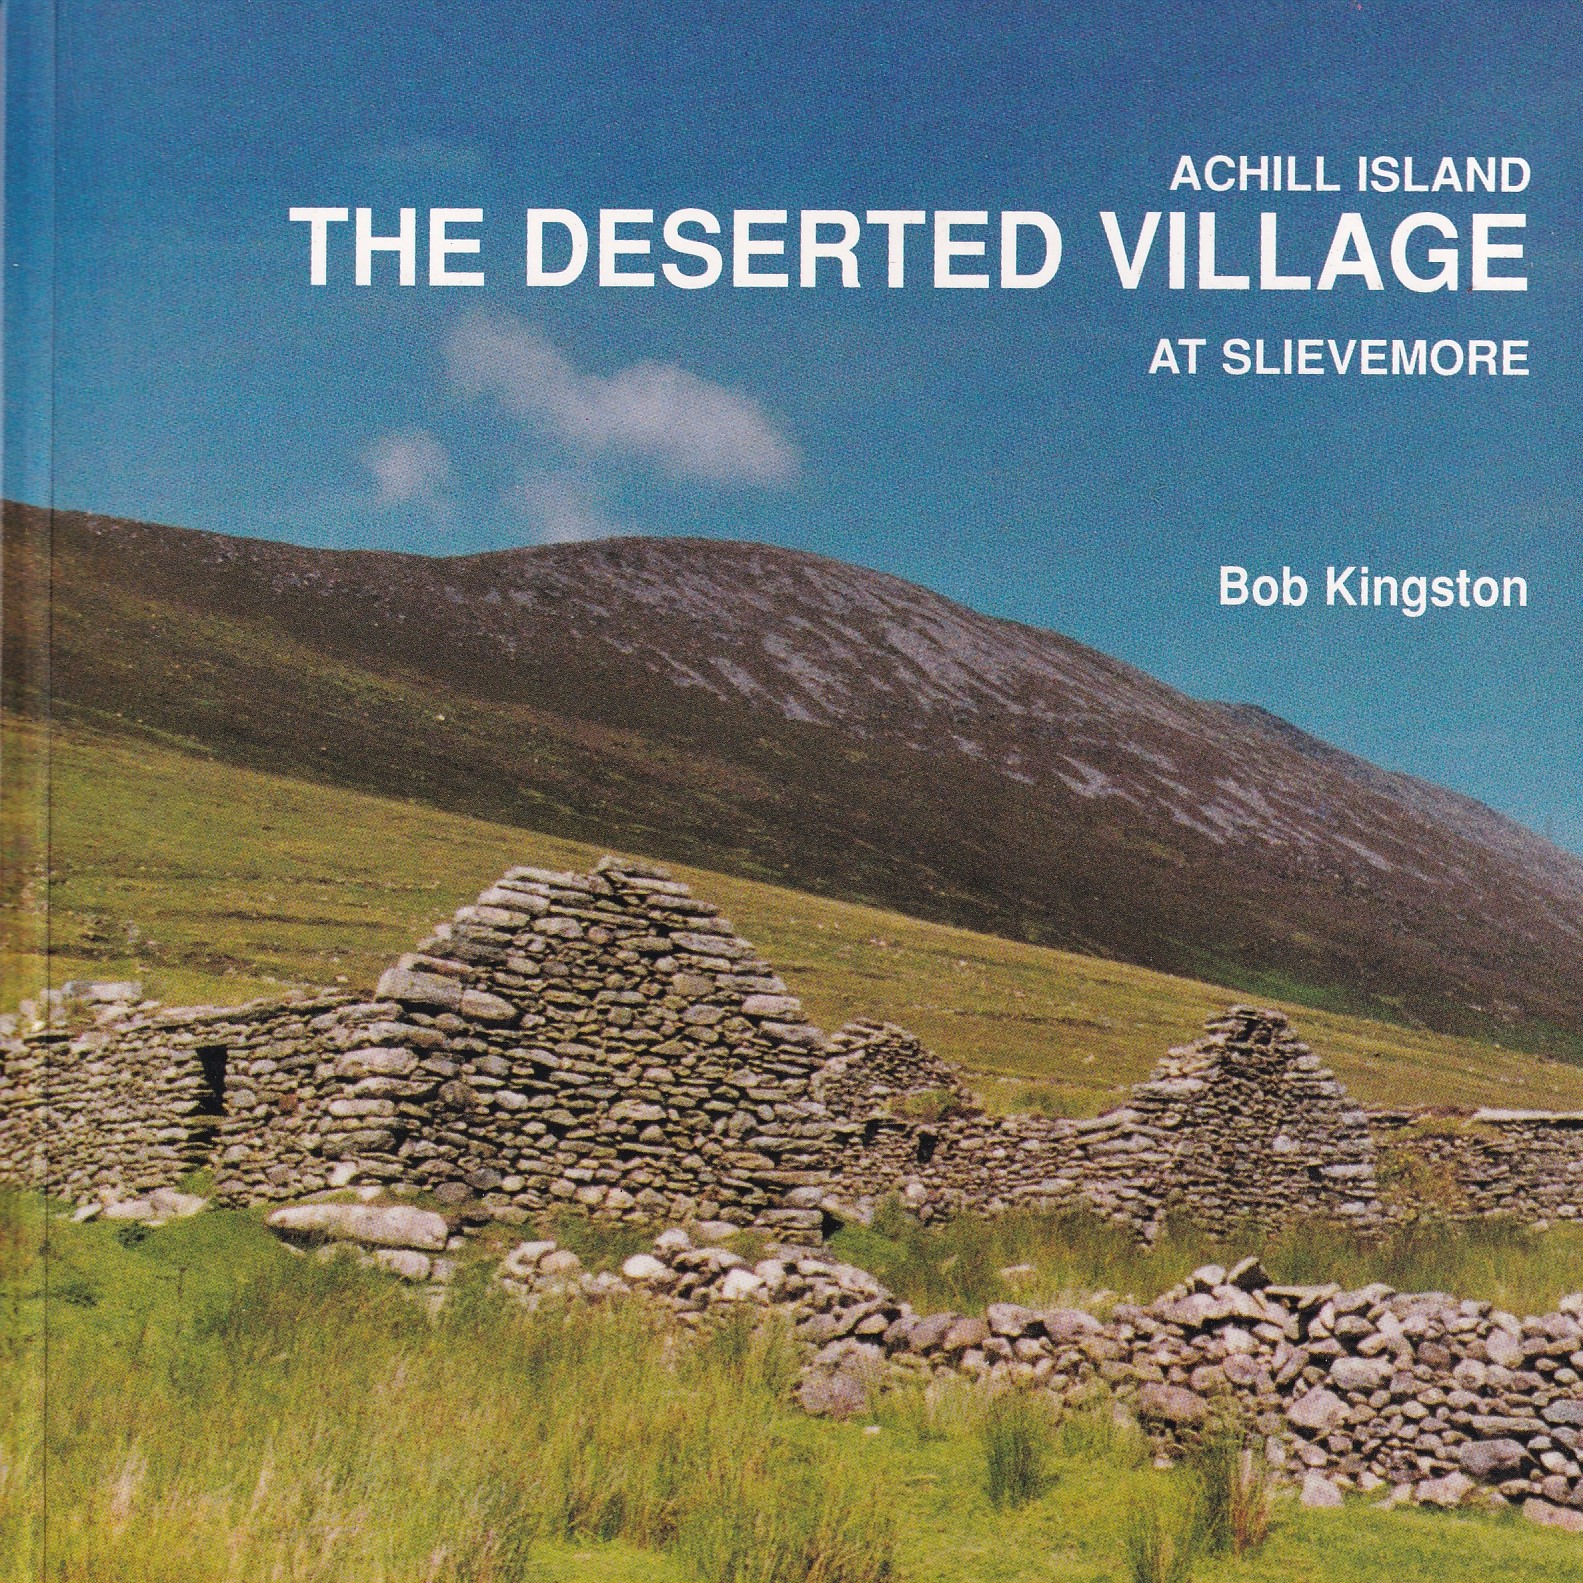 Achill Island: The Deserted Village at Slievemore by Bob Kingston